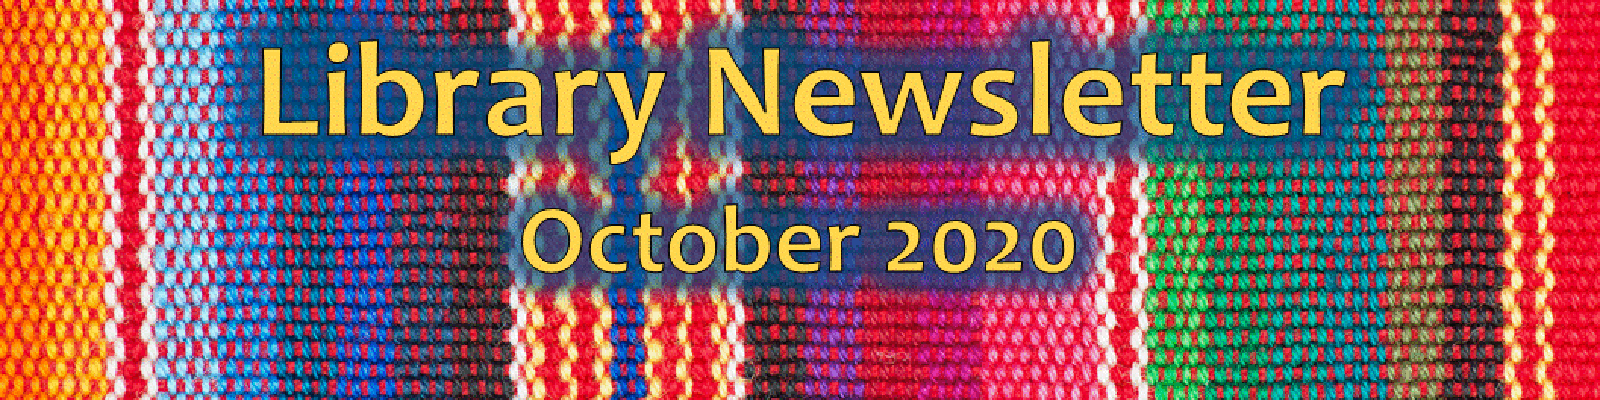 Library Newsletter October 2020 colorful textile banner